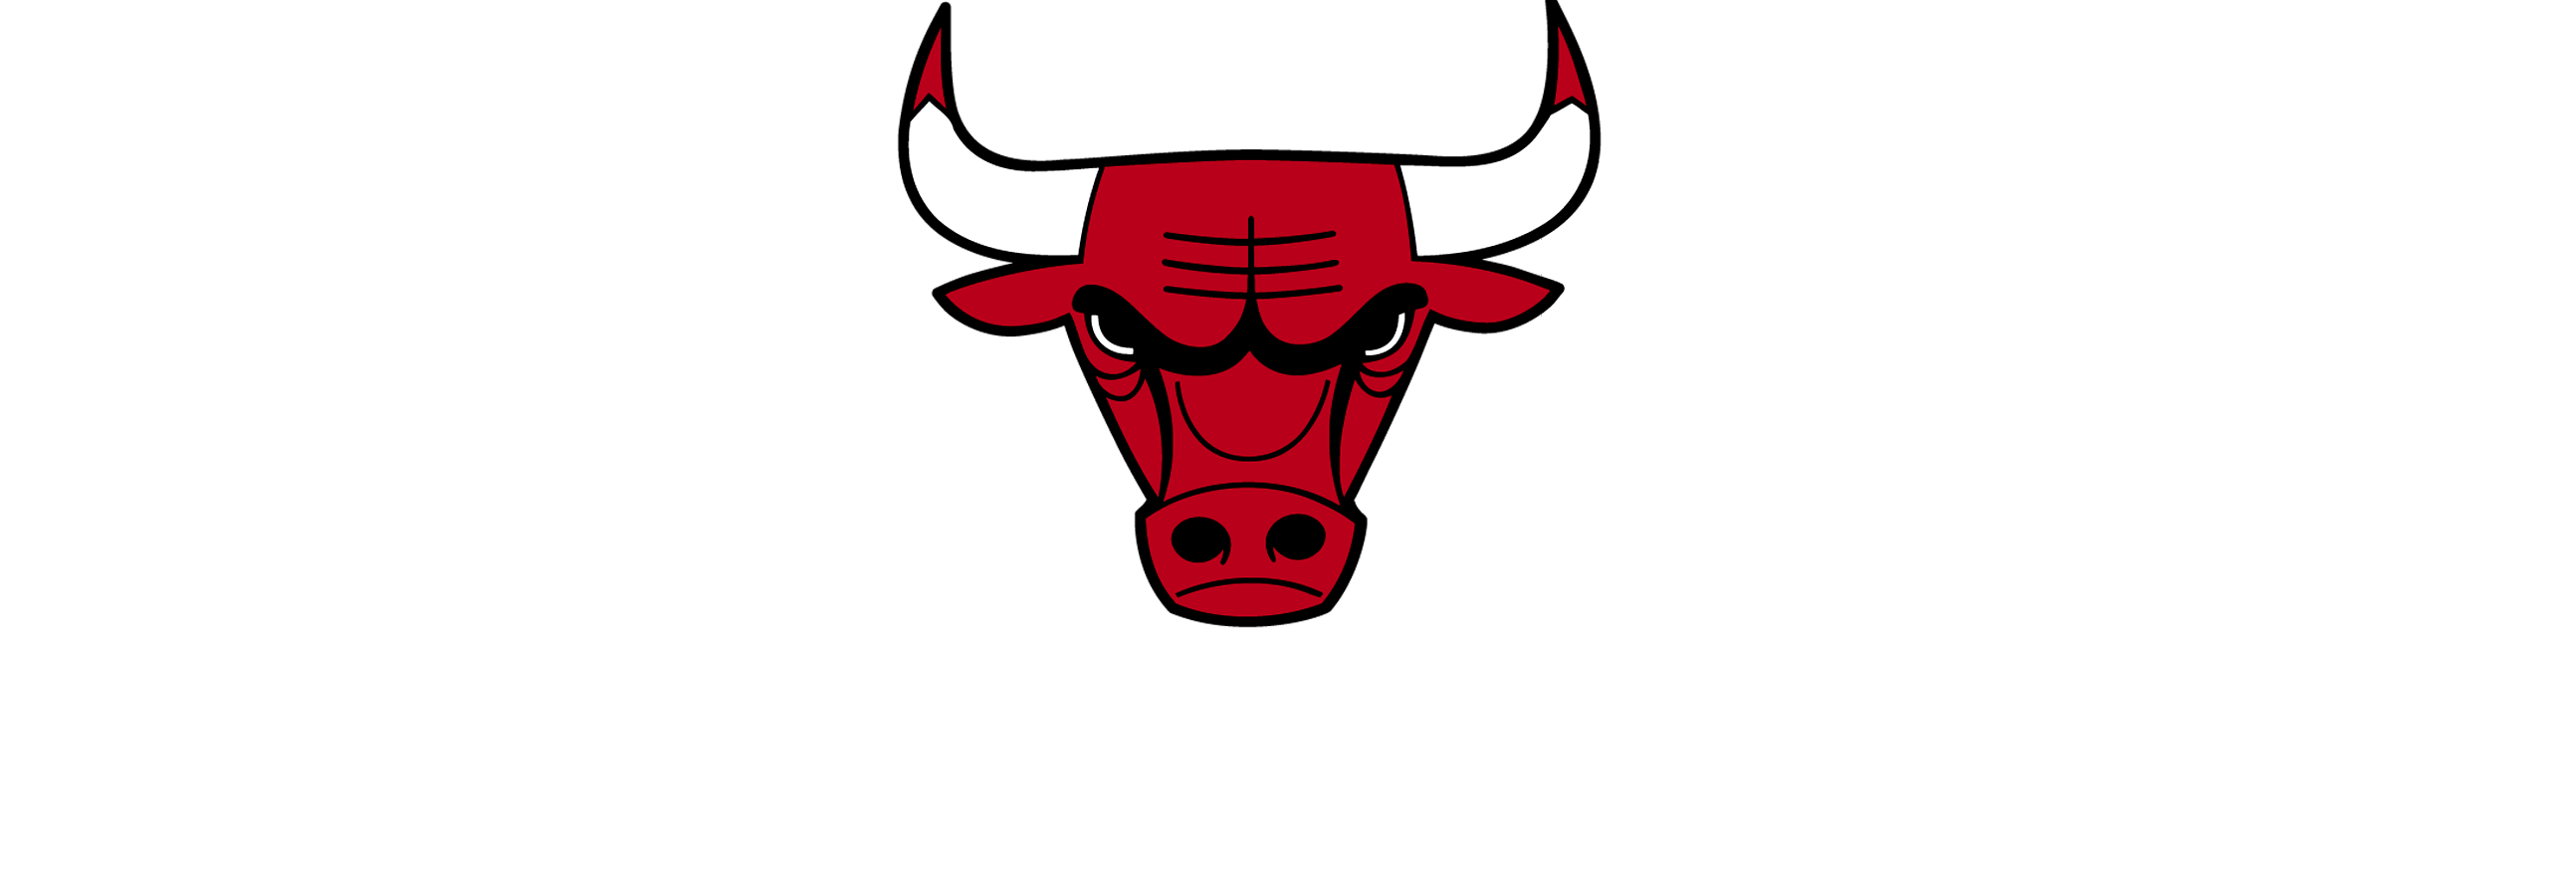 Download PNG image - Chicago Bulls PNG Photos 